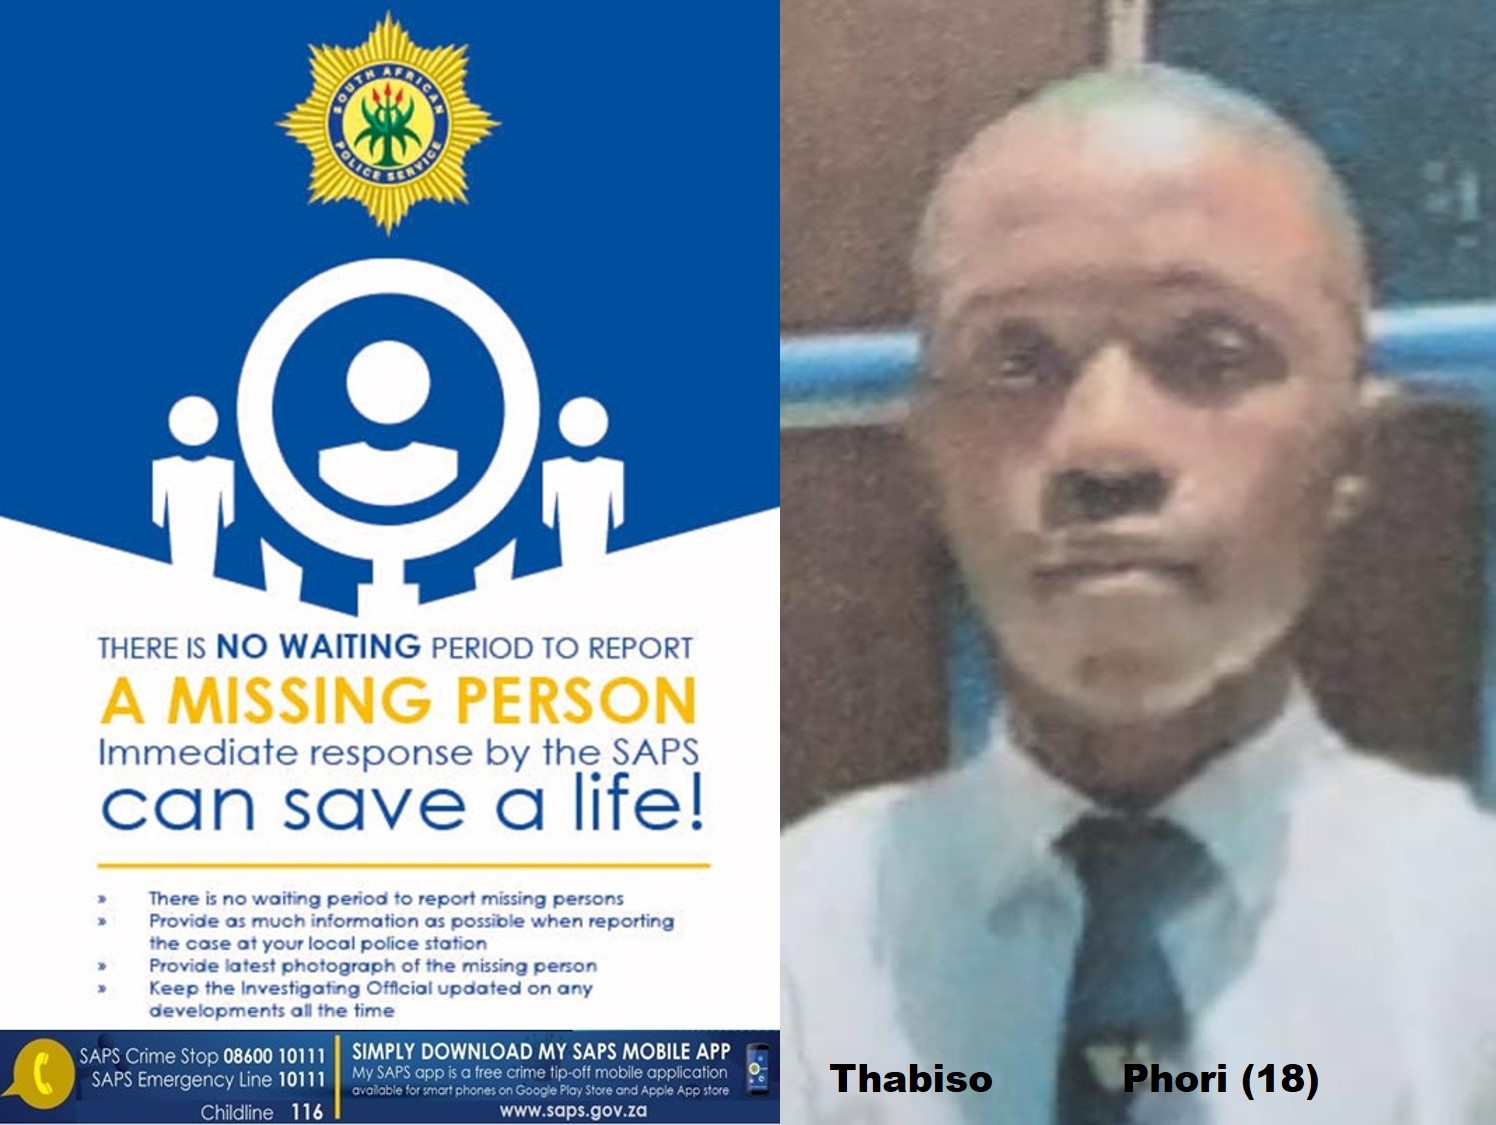 Thabiso Phori went missing after visiting a tavern in Odendaalsrus CBD